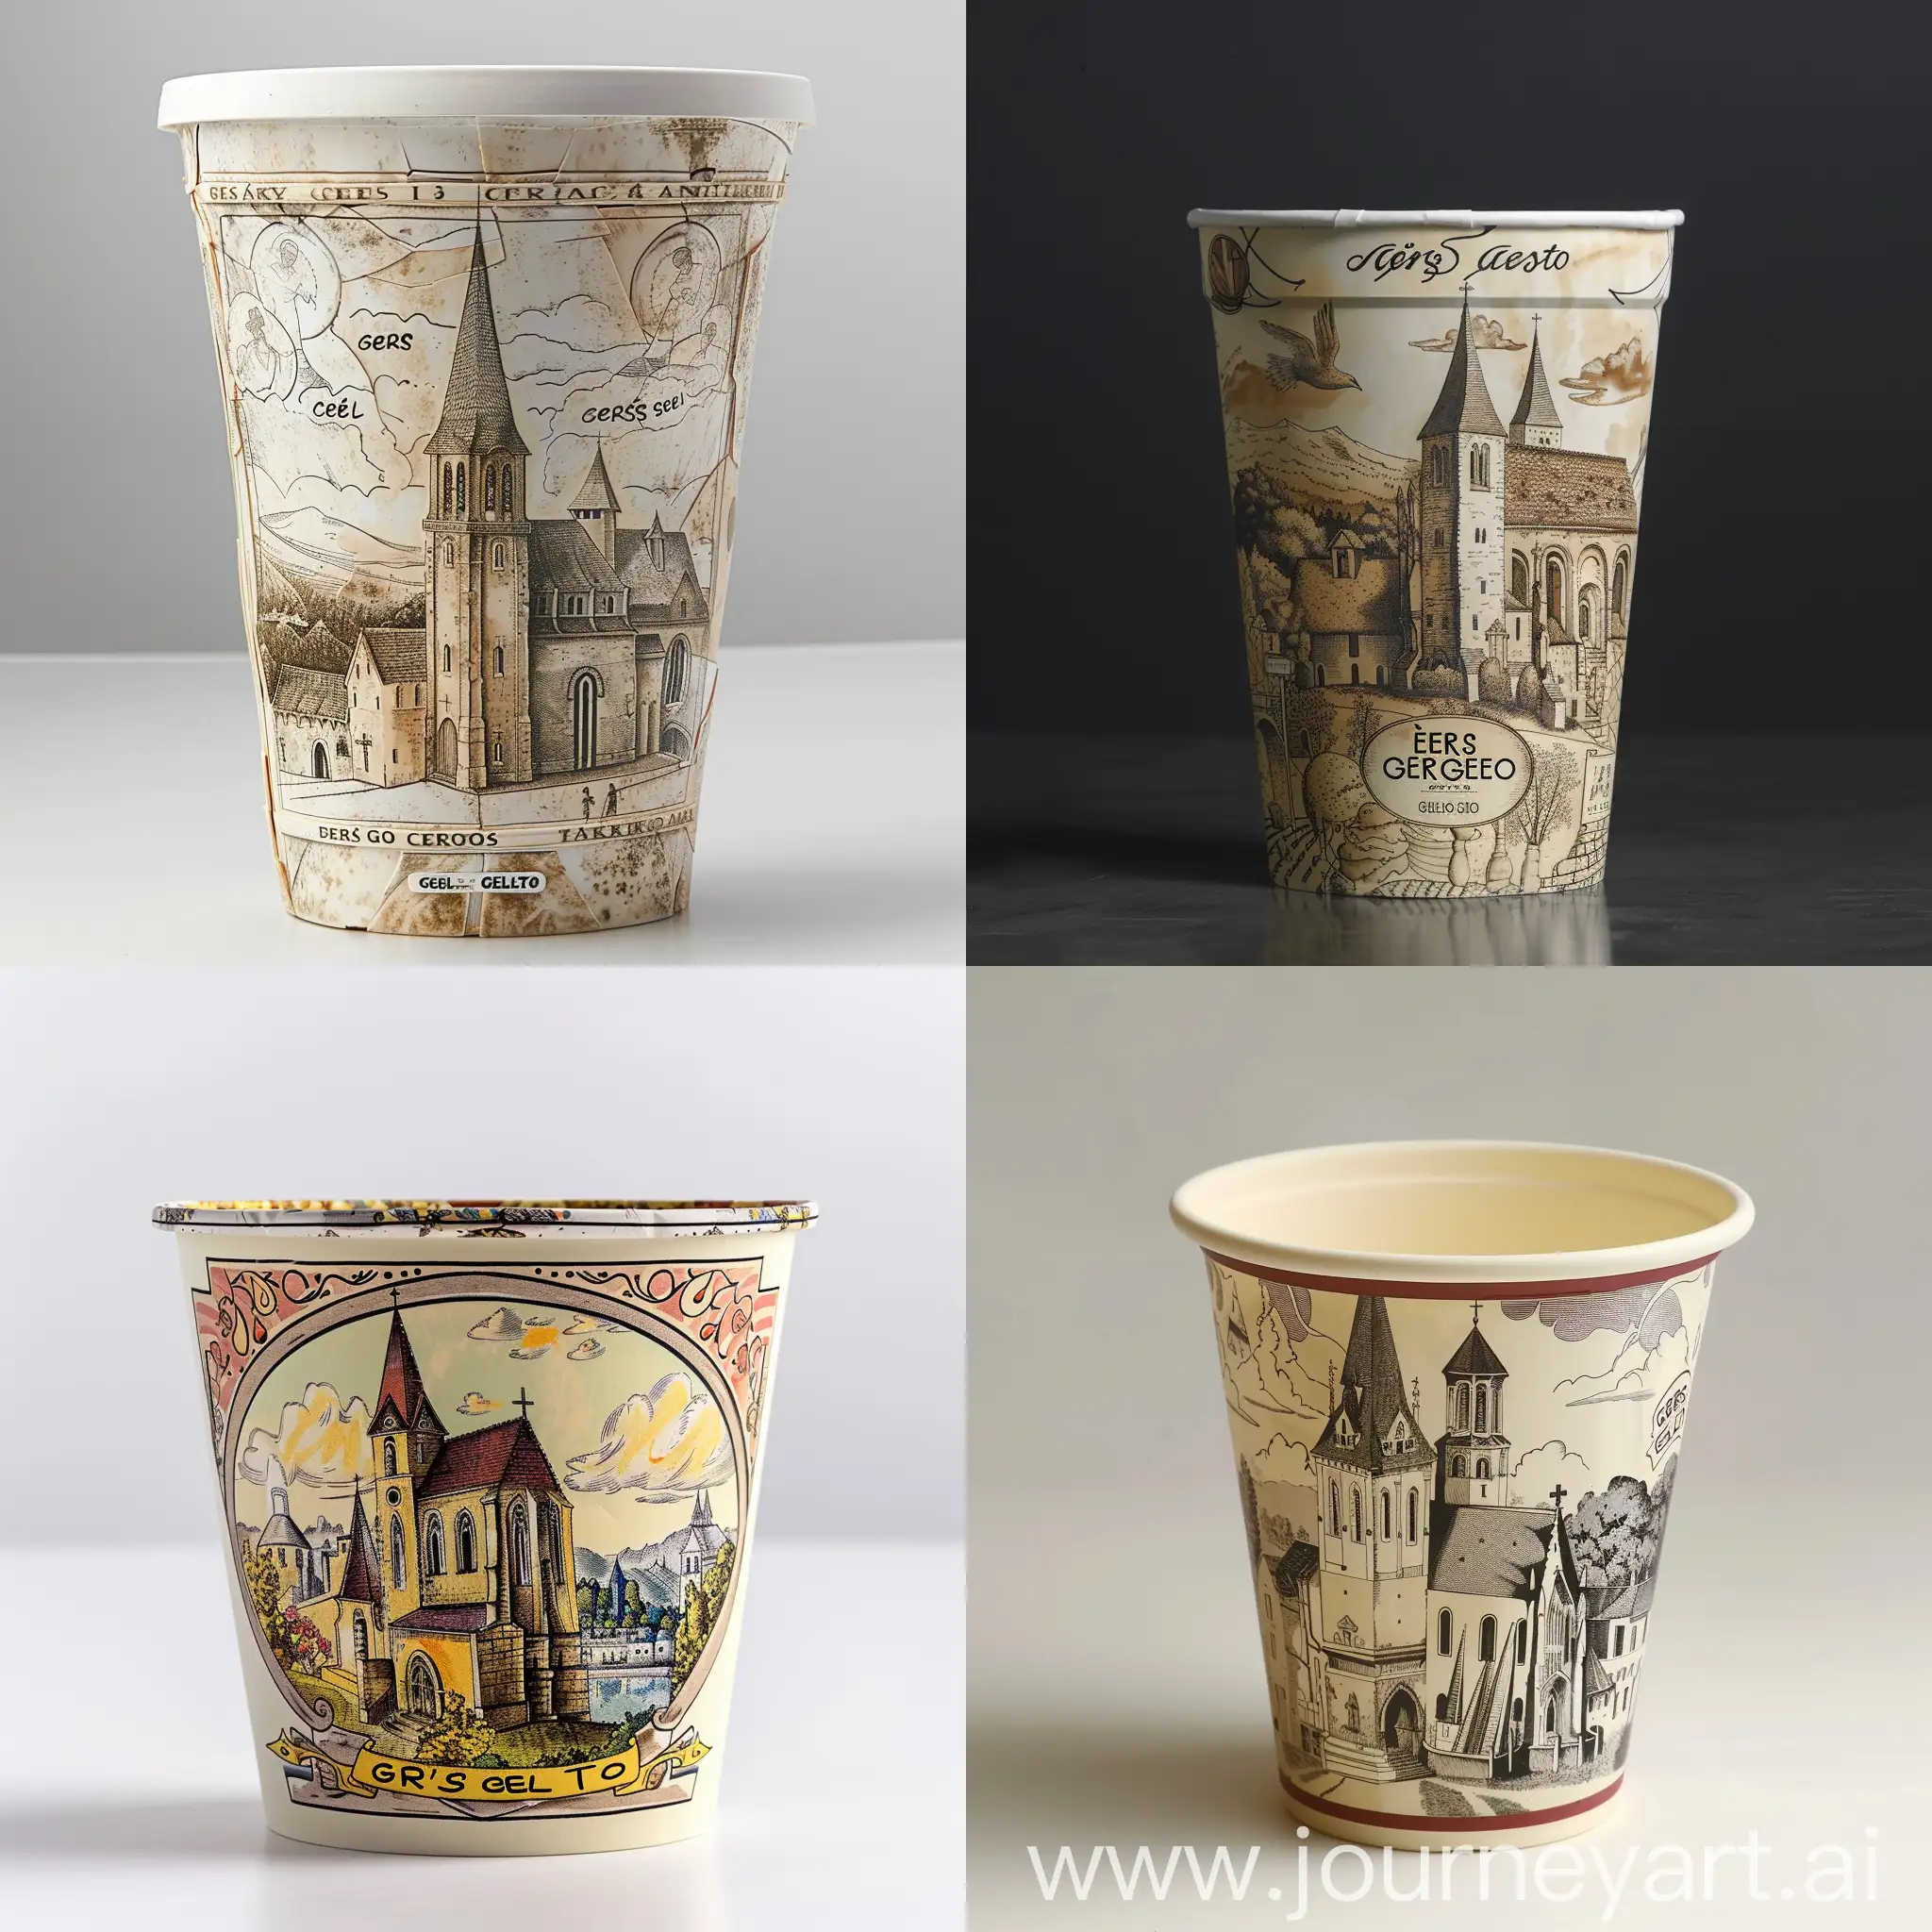 EcoFriendly-TakeAway-Ice-Cream-Tub-featuring-13th-Century-French-Church-Image